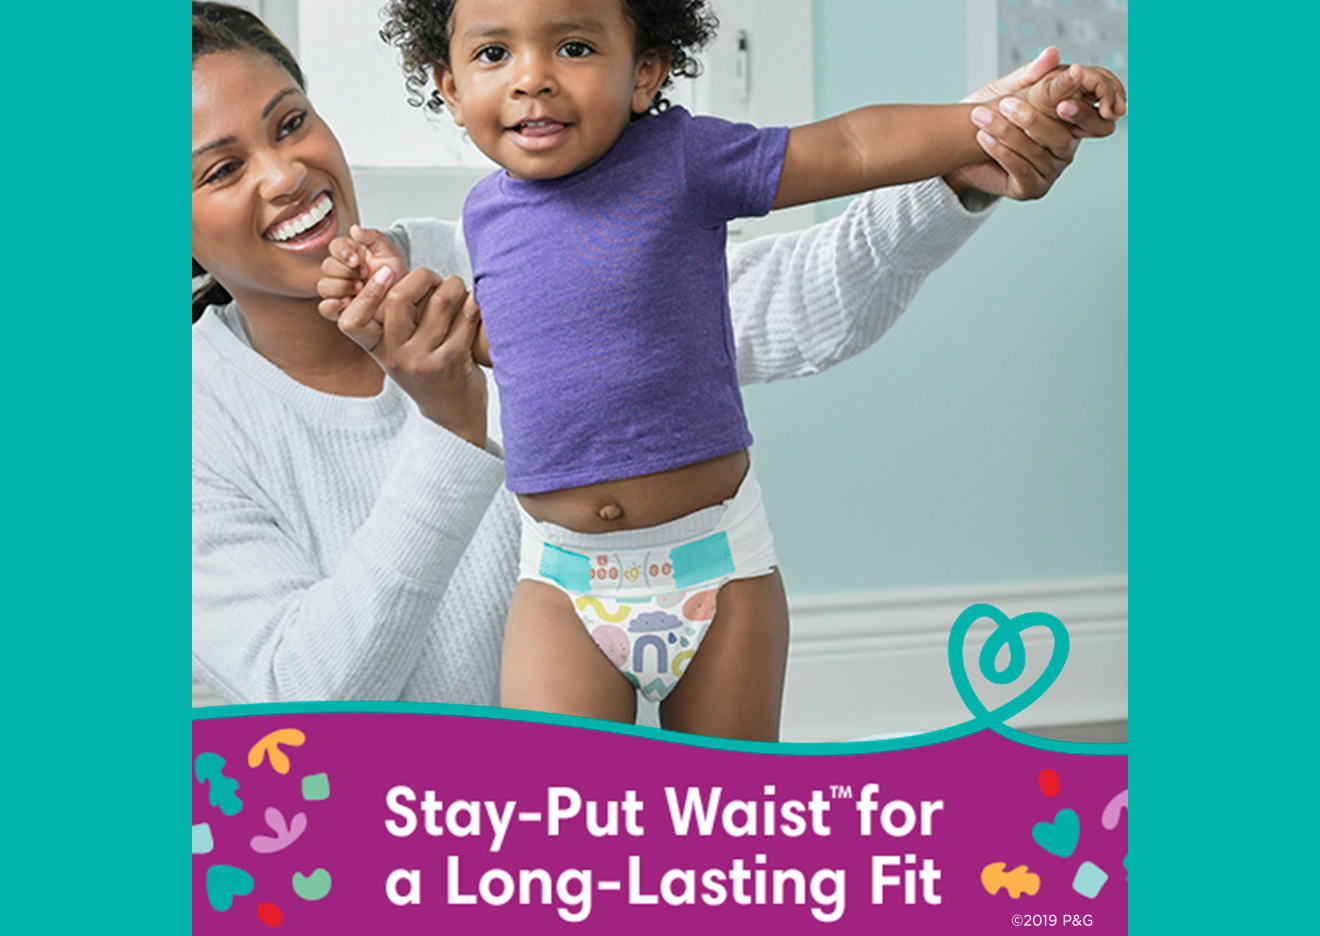 Stay put waist for a long-lasting fit